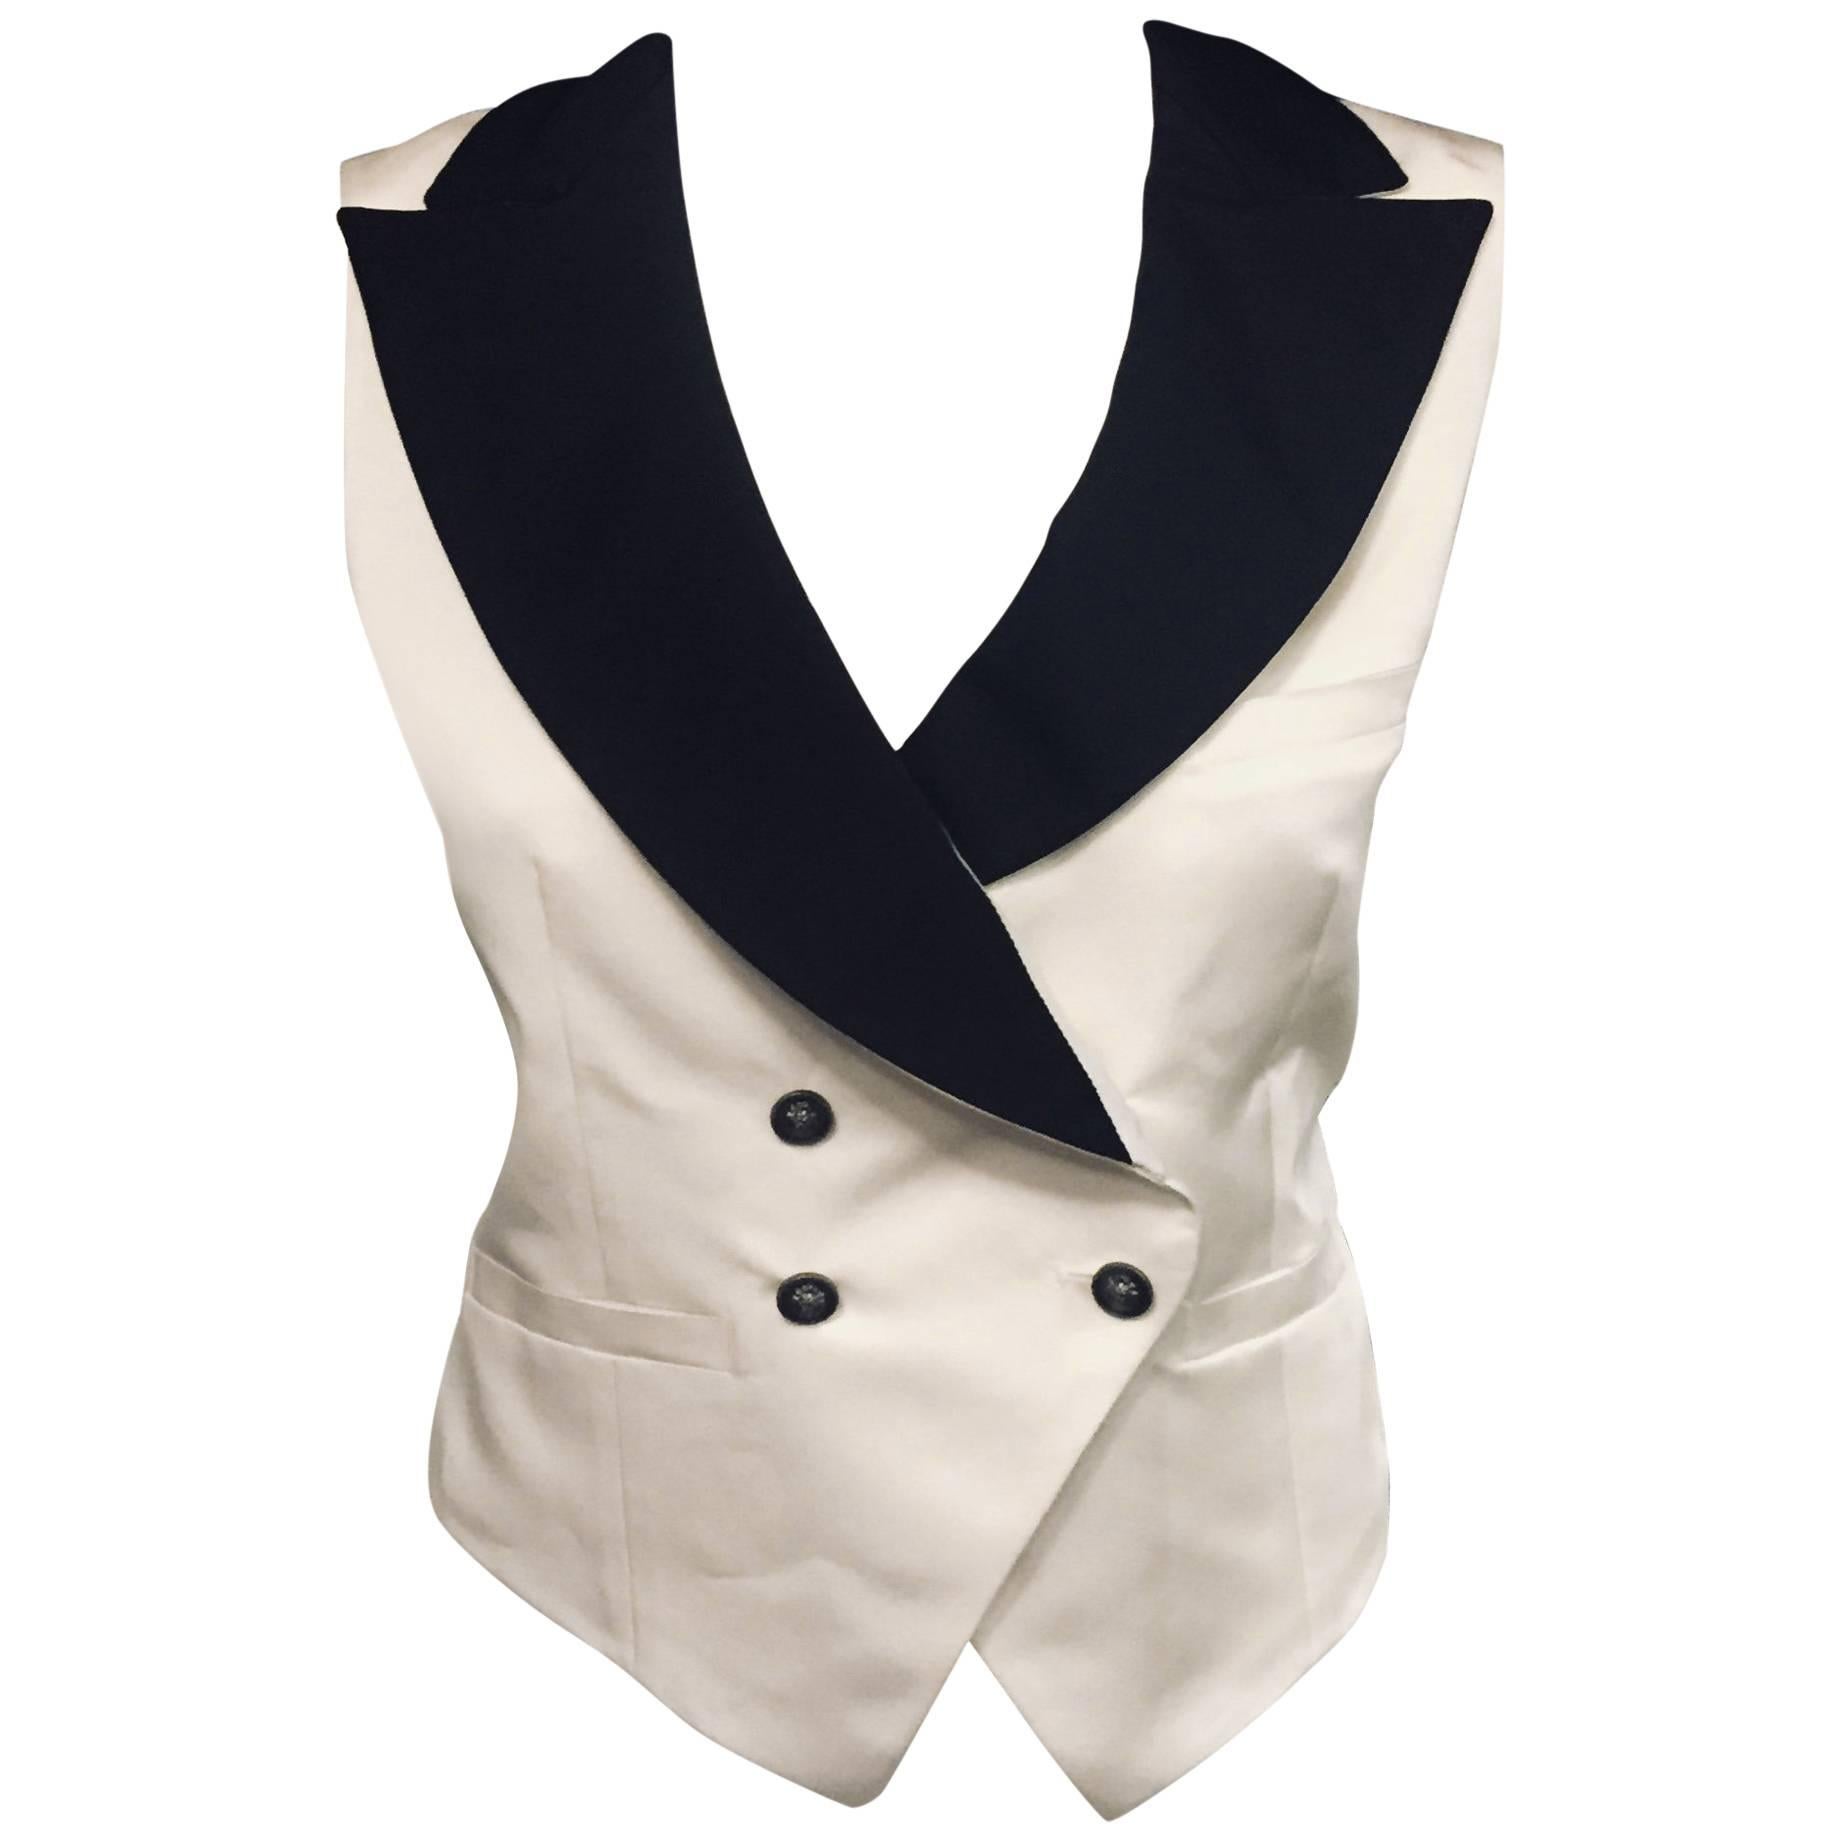 Chanel Champagne Tuxedo Style Vest with Black Collar and Four Chanel Buttons